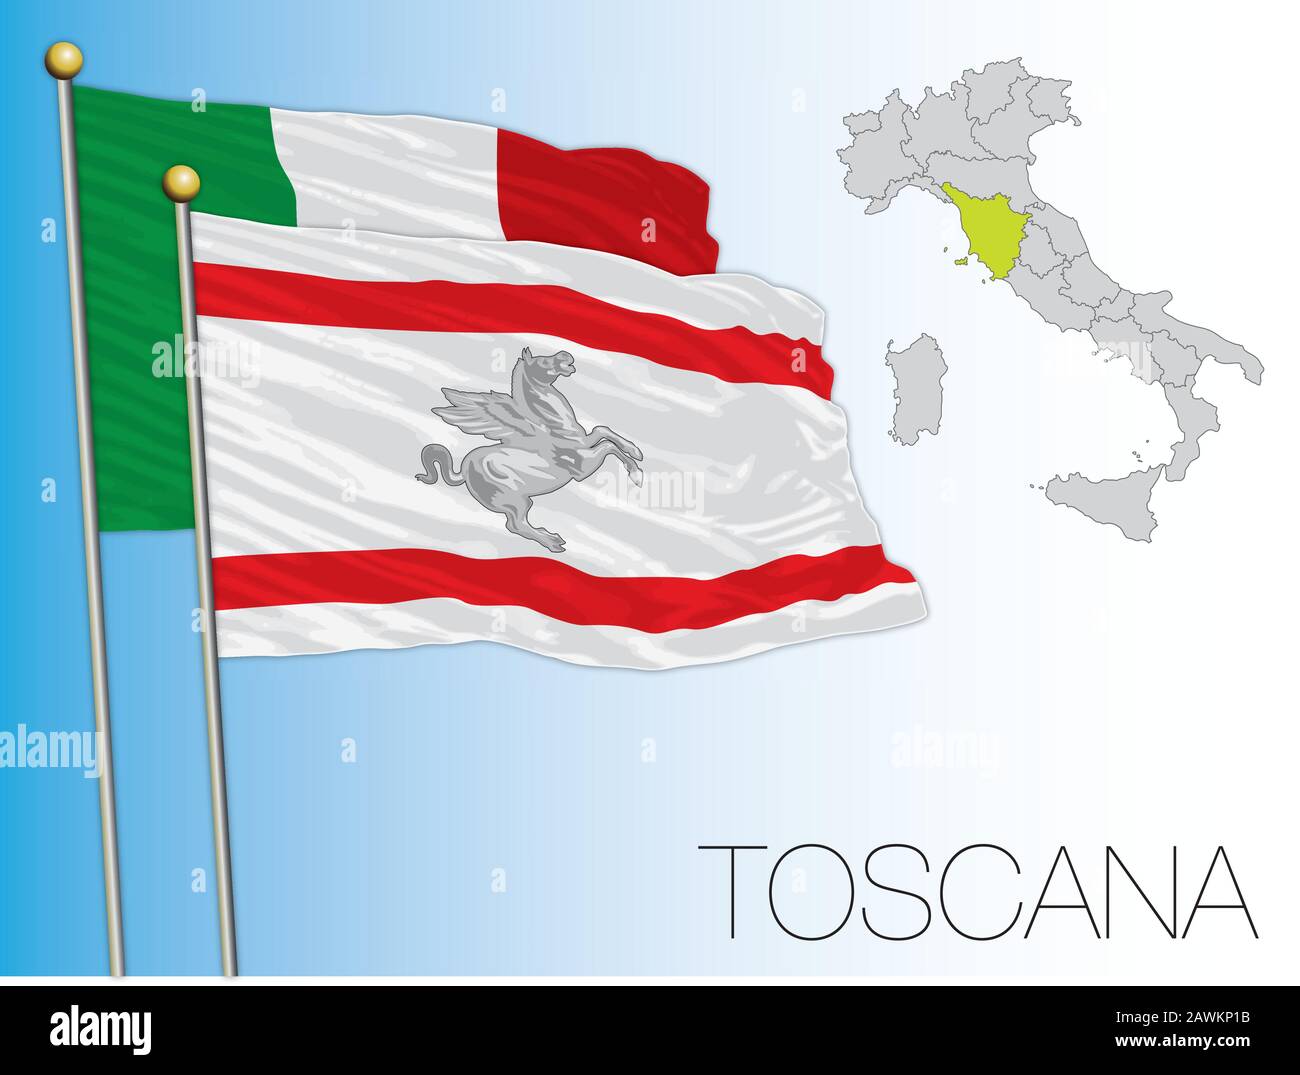 Tuscany official regional flag and map, Italy, vector illustration Stock Vector